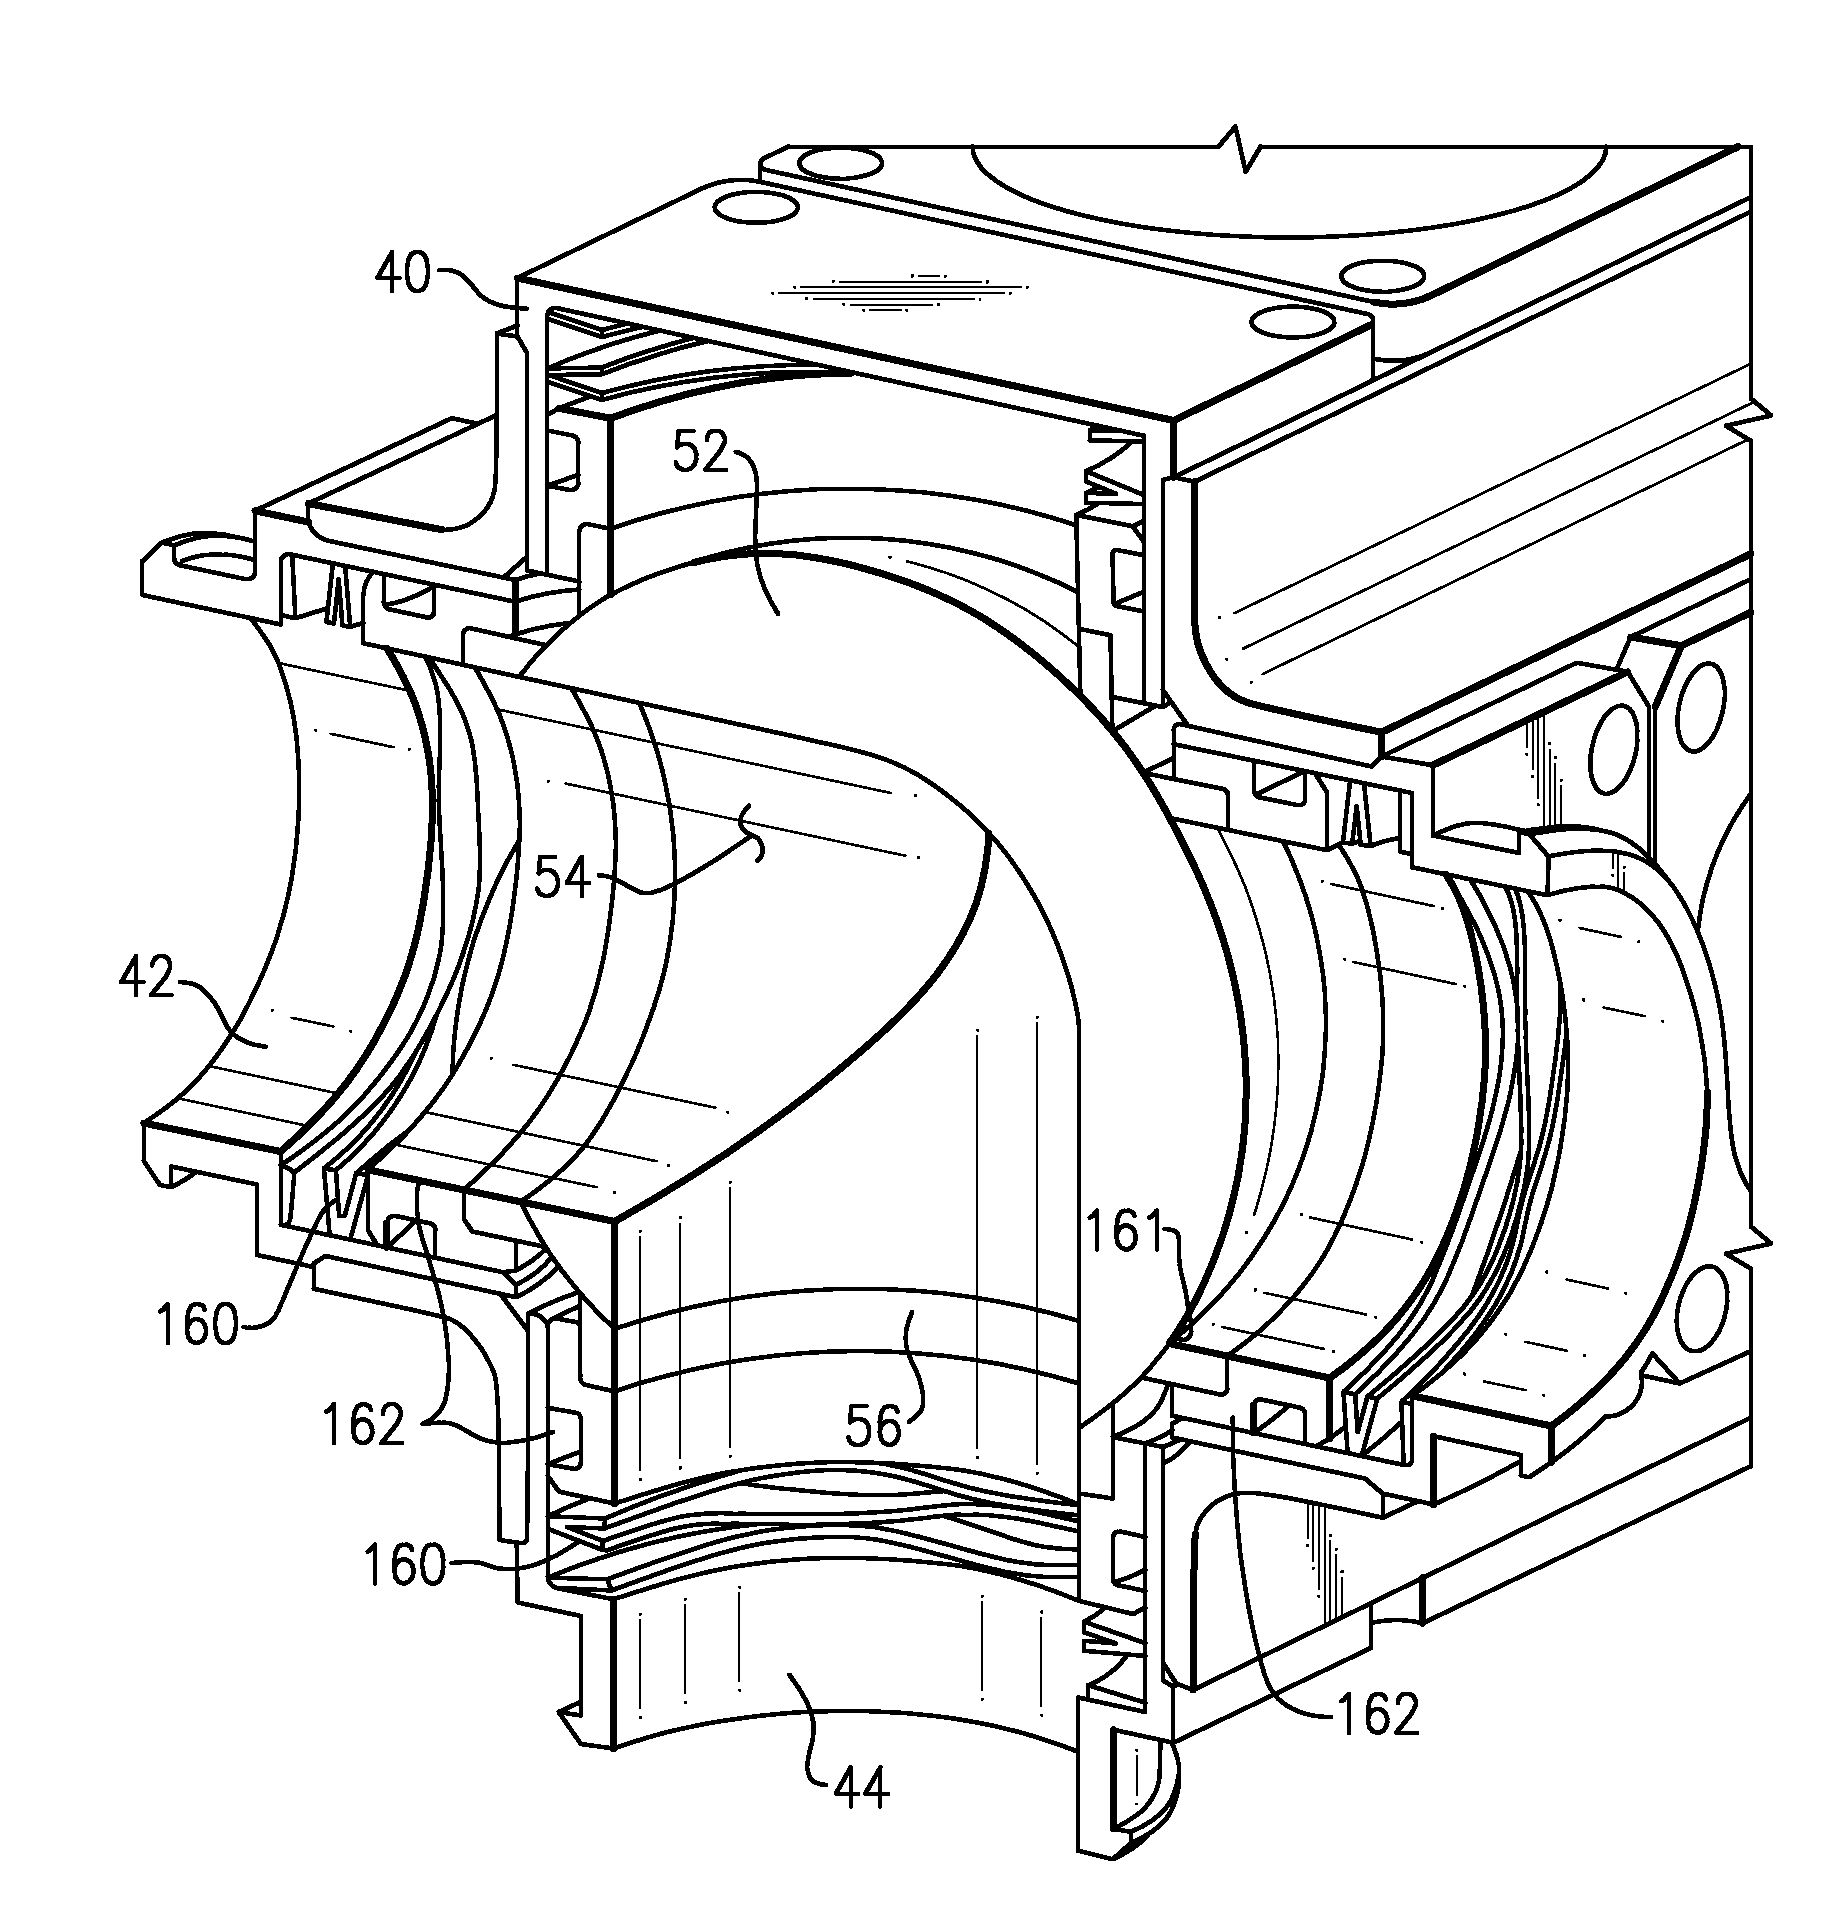 Rotary valve element for twin bed alternative treatment systems